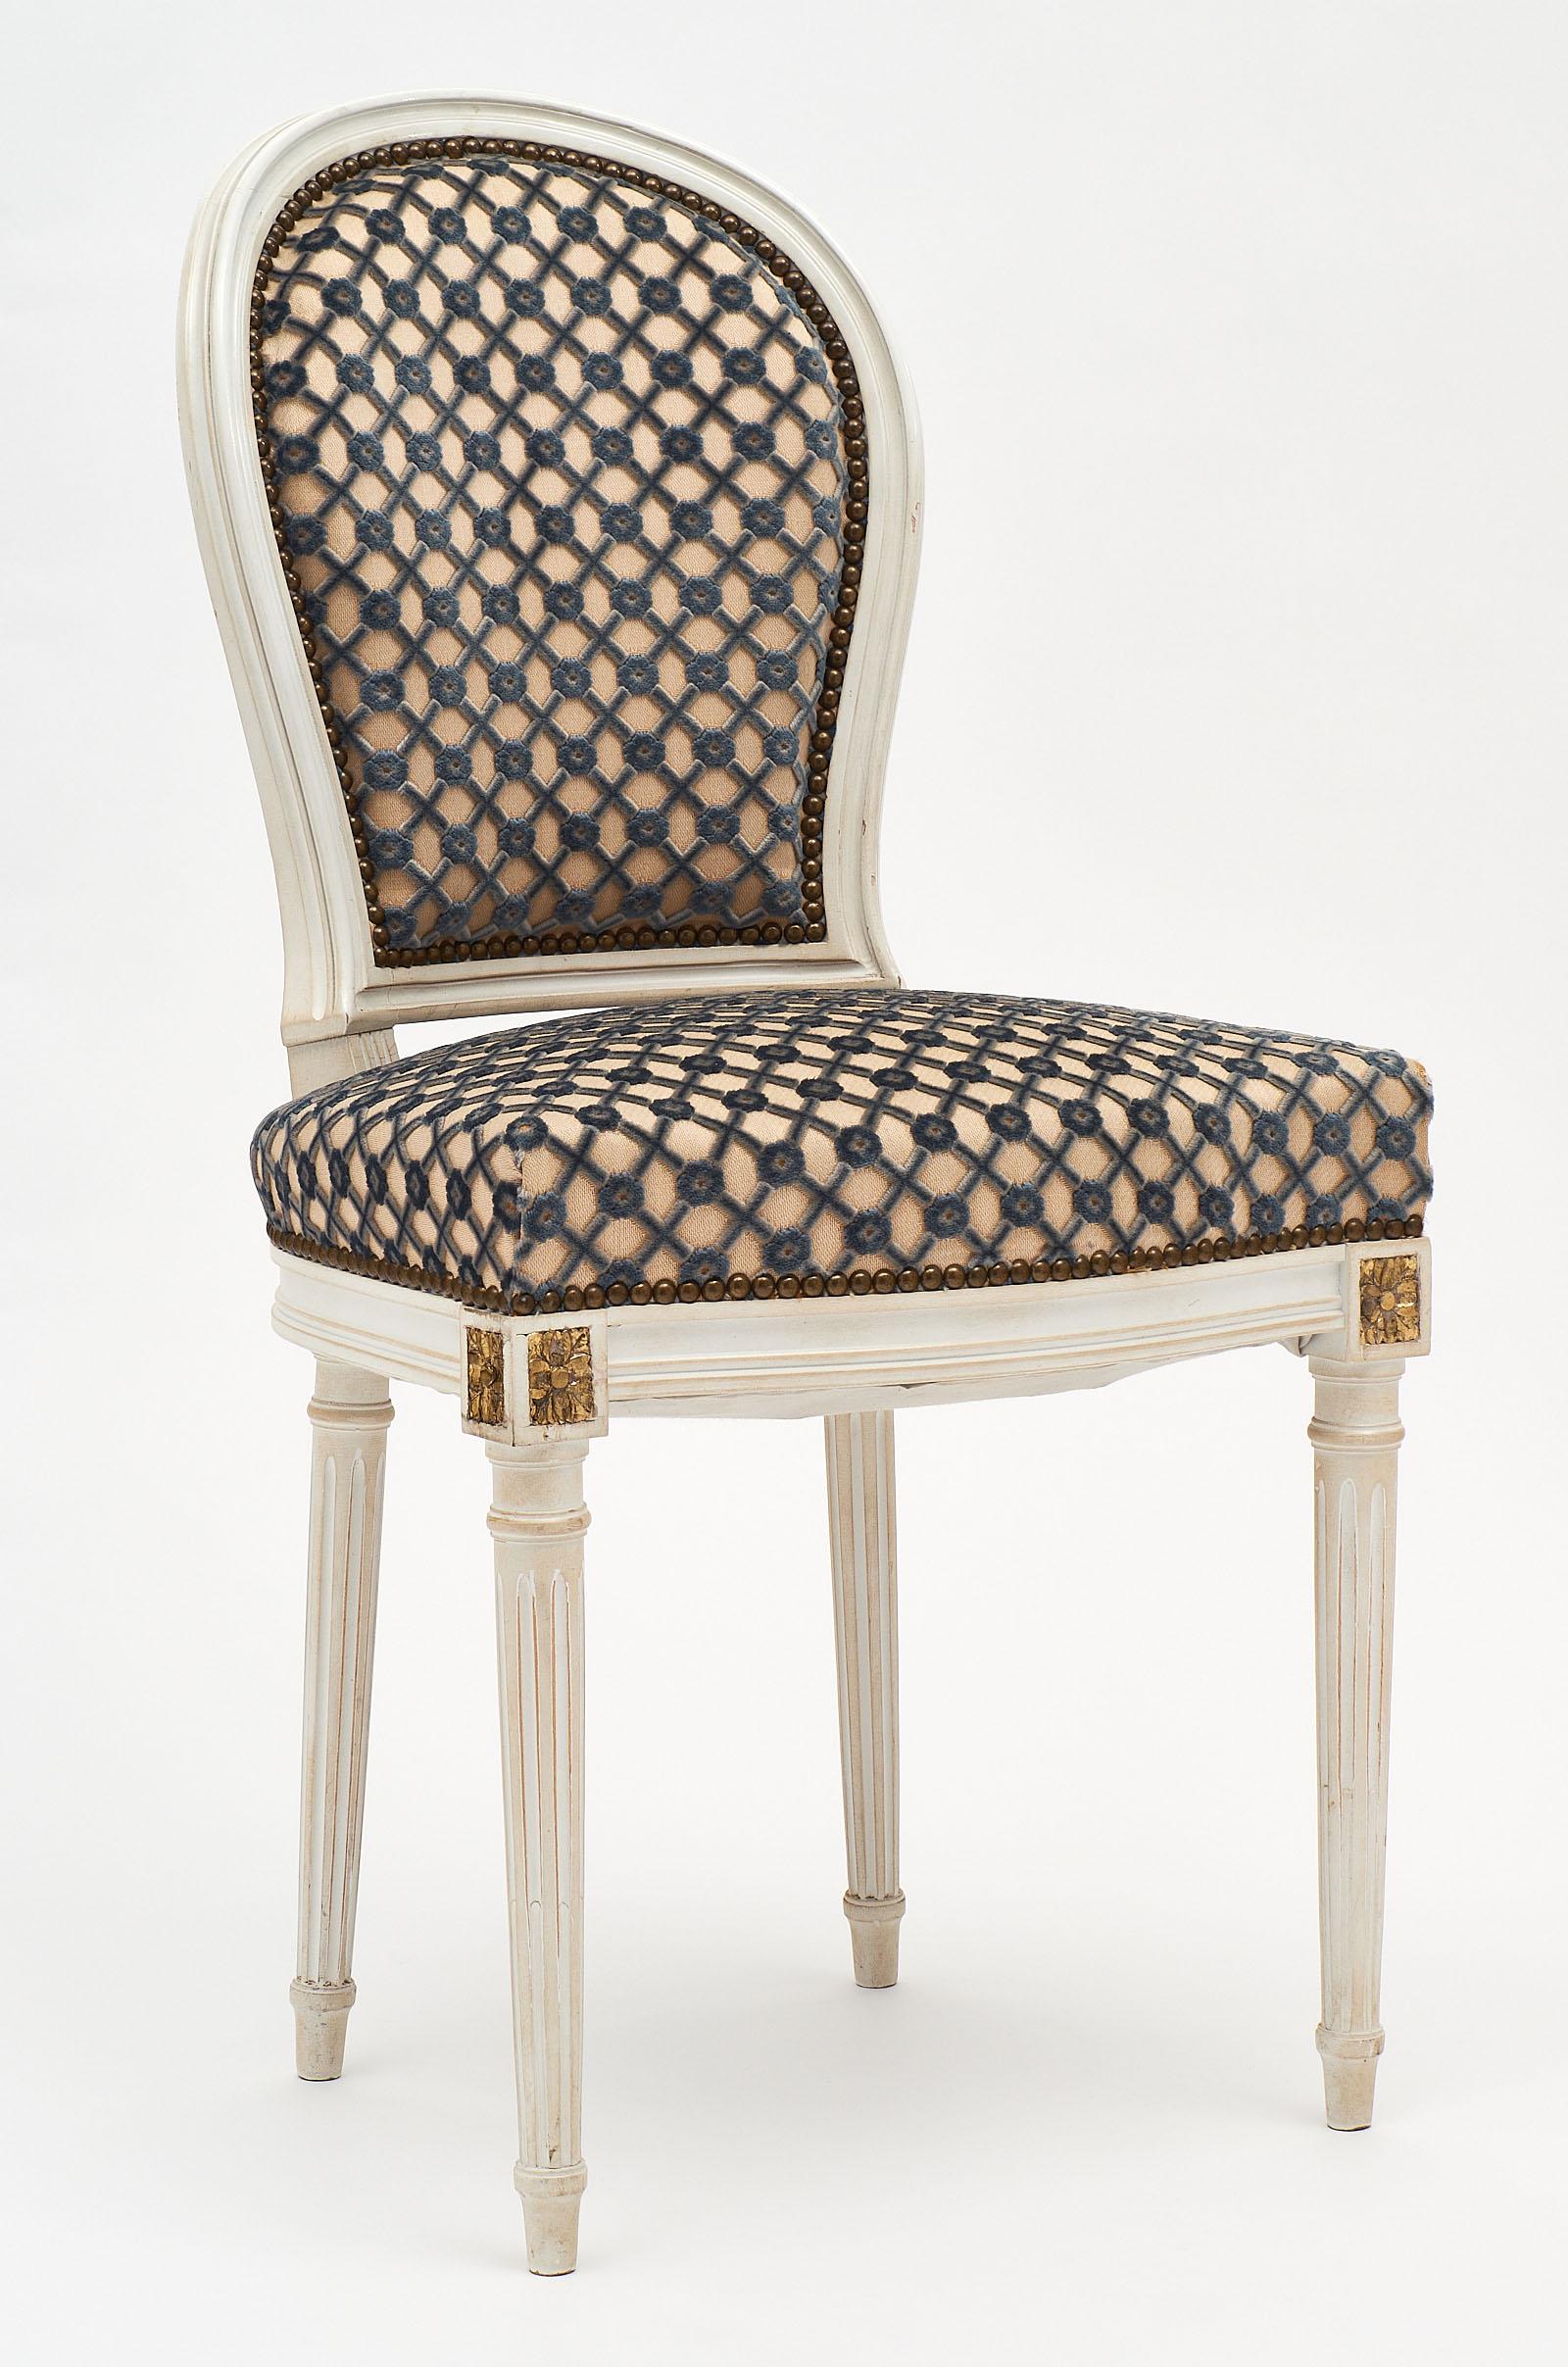 A set of four Louis XVI style chairs with medallion backs featuring hand carved details and gold-leaf accents. We love the Classic, painted frames. The upholstery is original to the set.